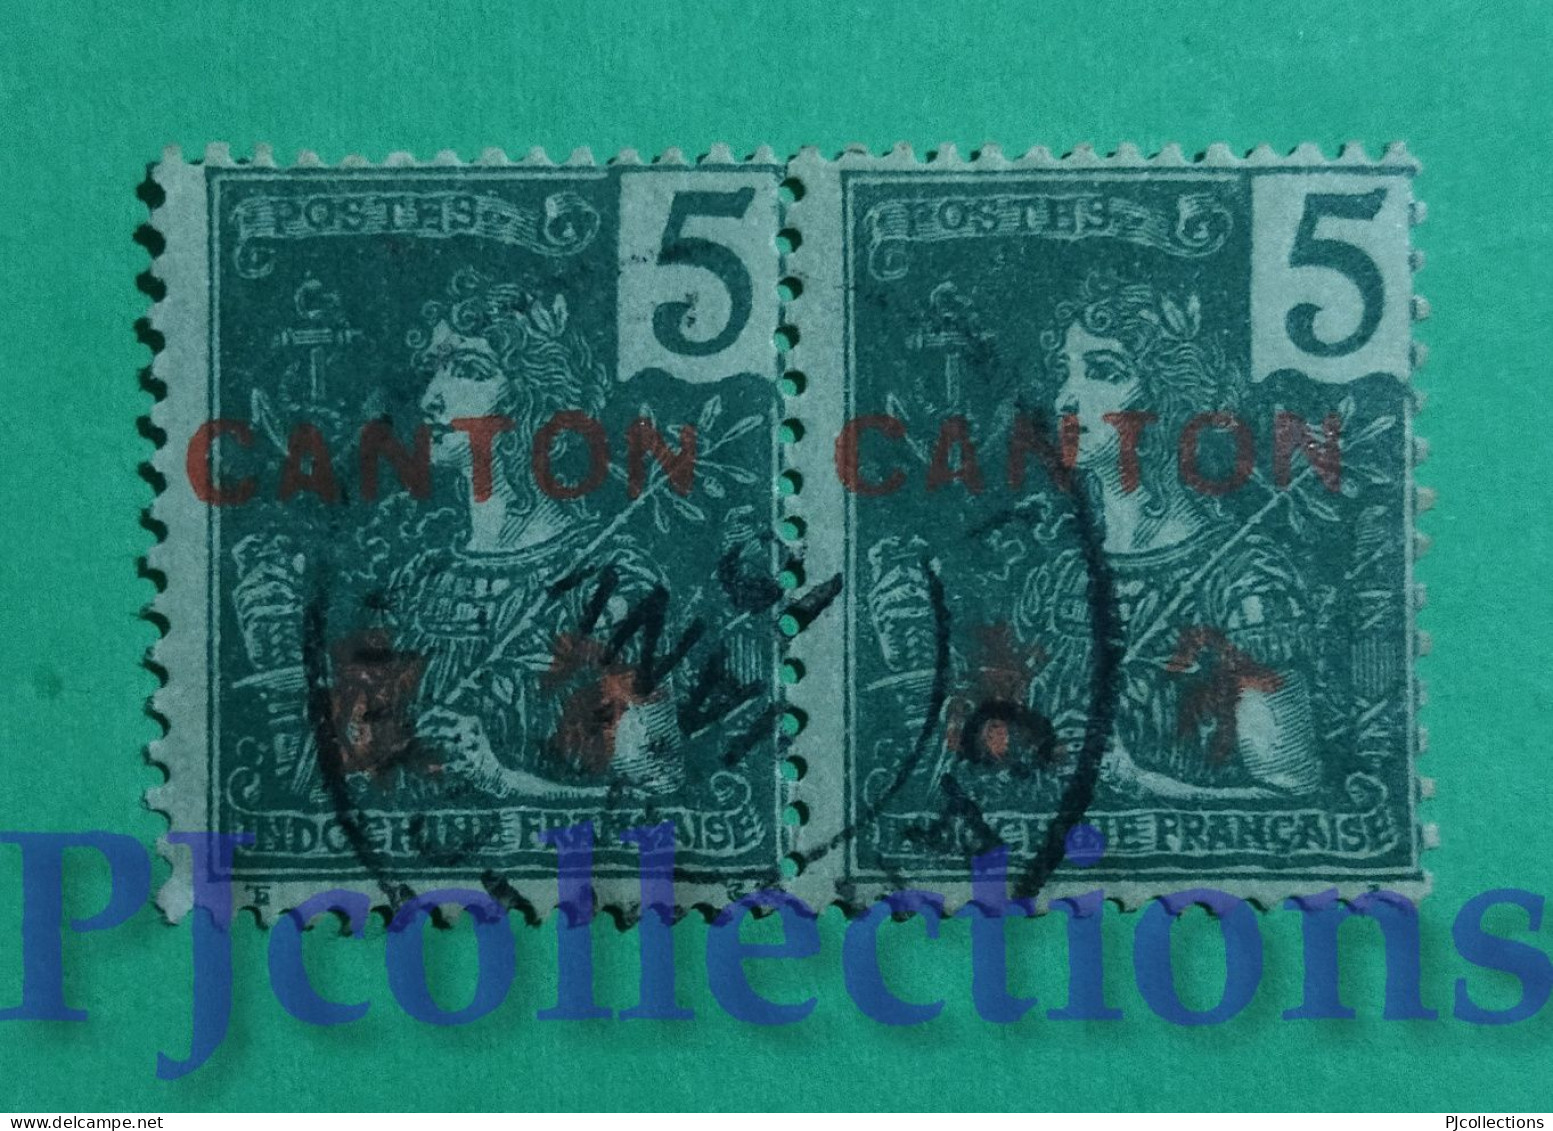 S786- FRENCH INDOCHINA CANTON 1907 OVERPRINTED 5c IN COPPIA - COUPLE USATI - USED - Used Stamps